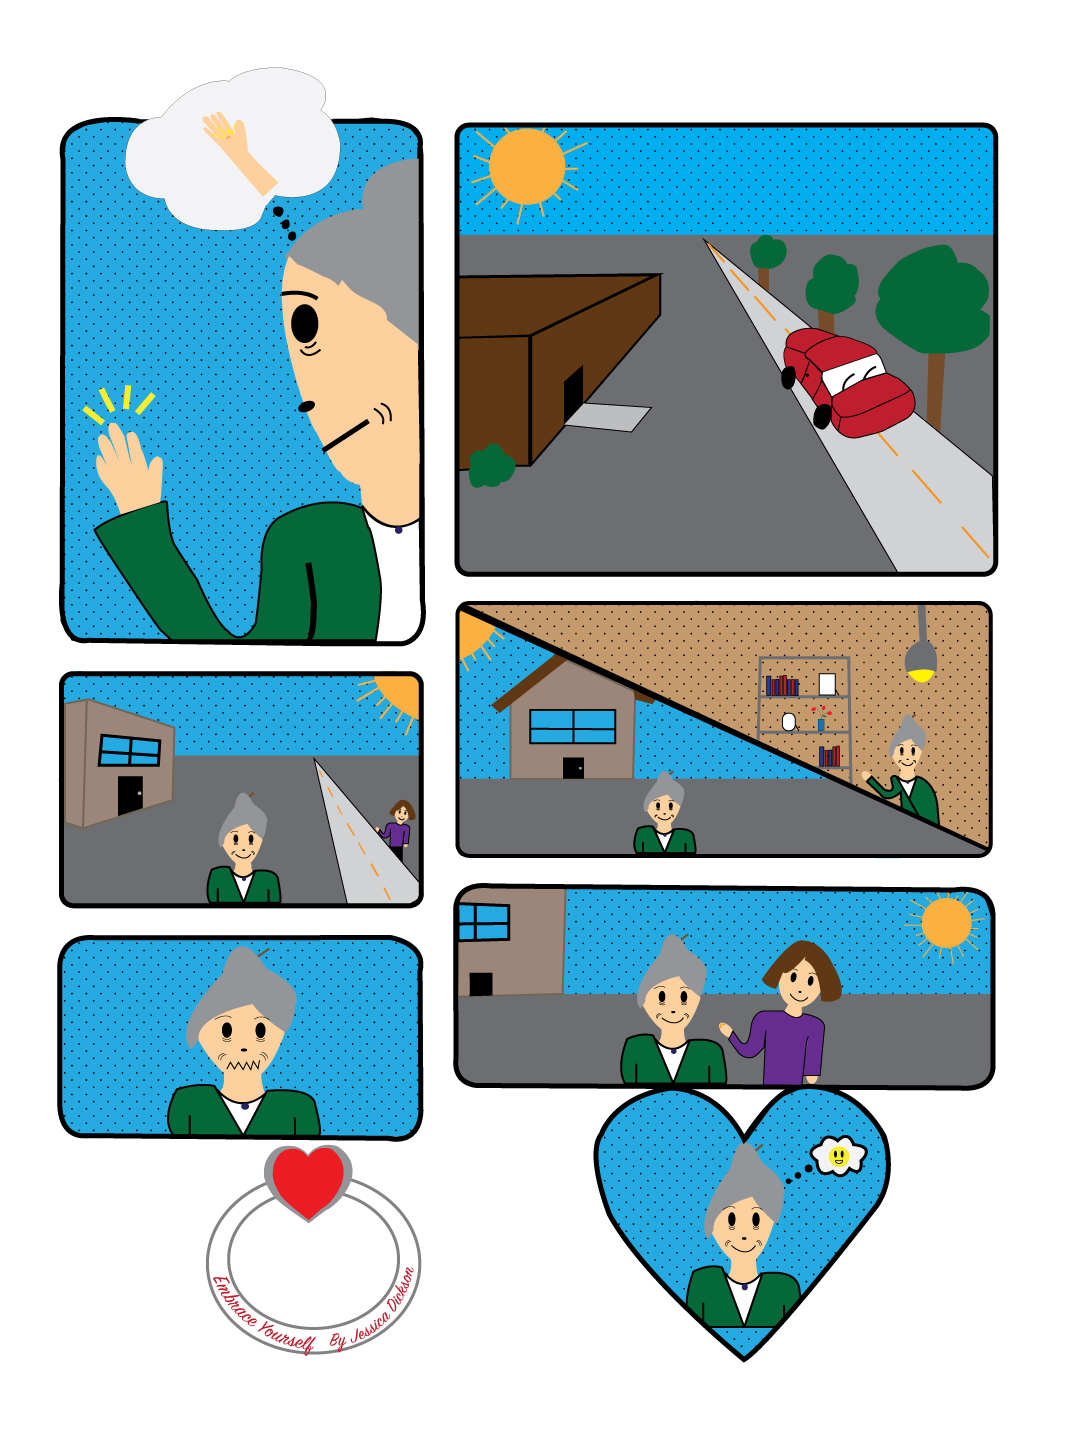 This is a picture of my comic that I produced in Illustrator.